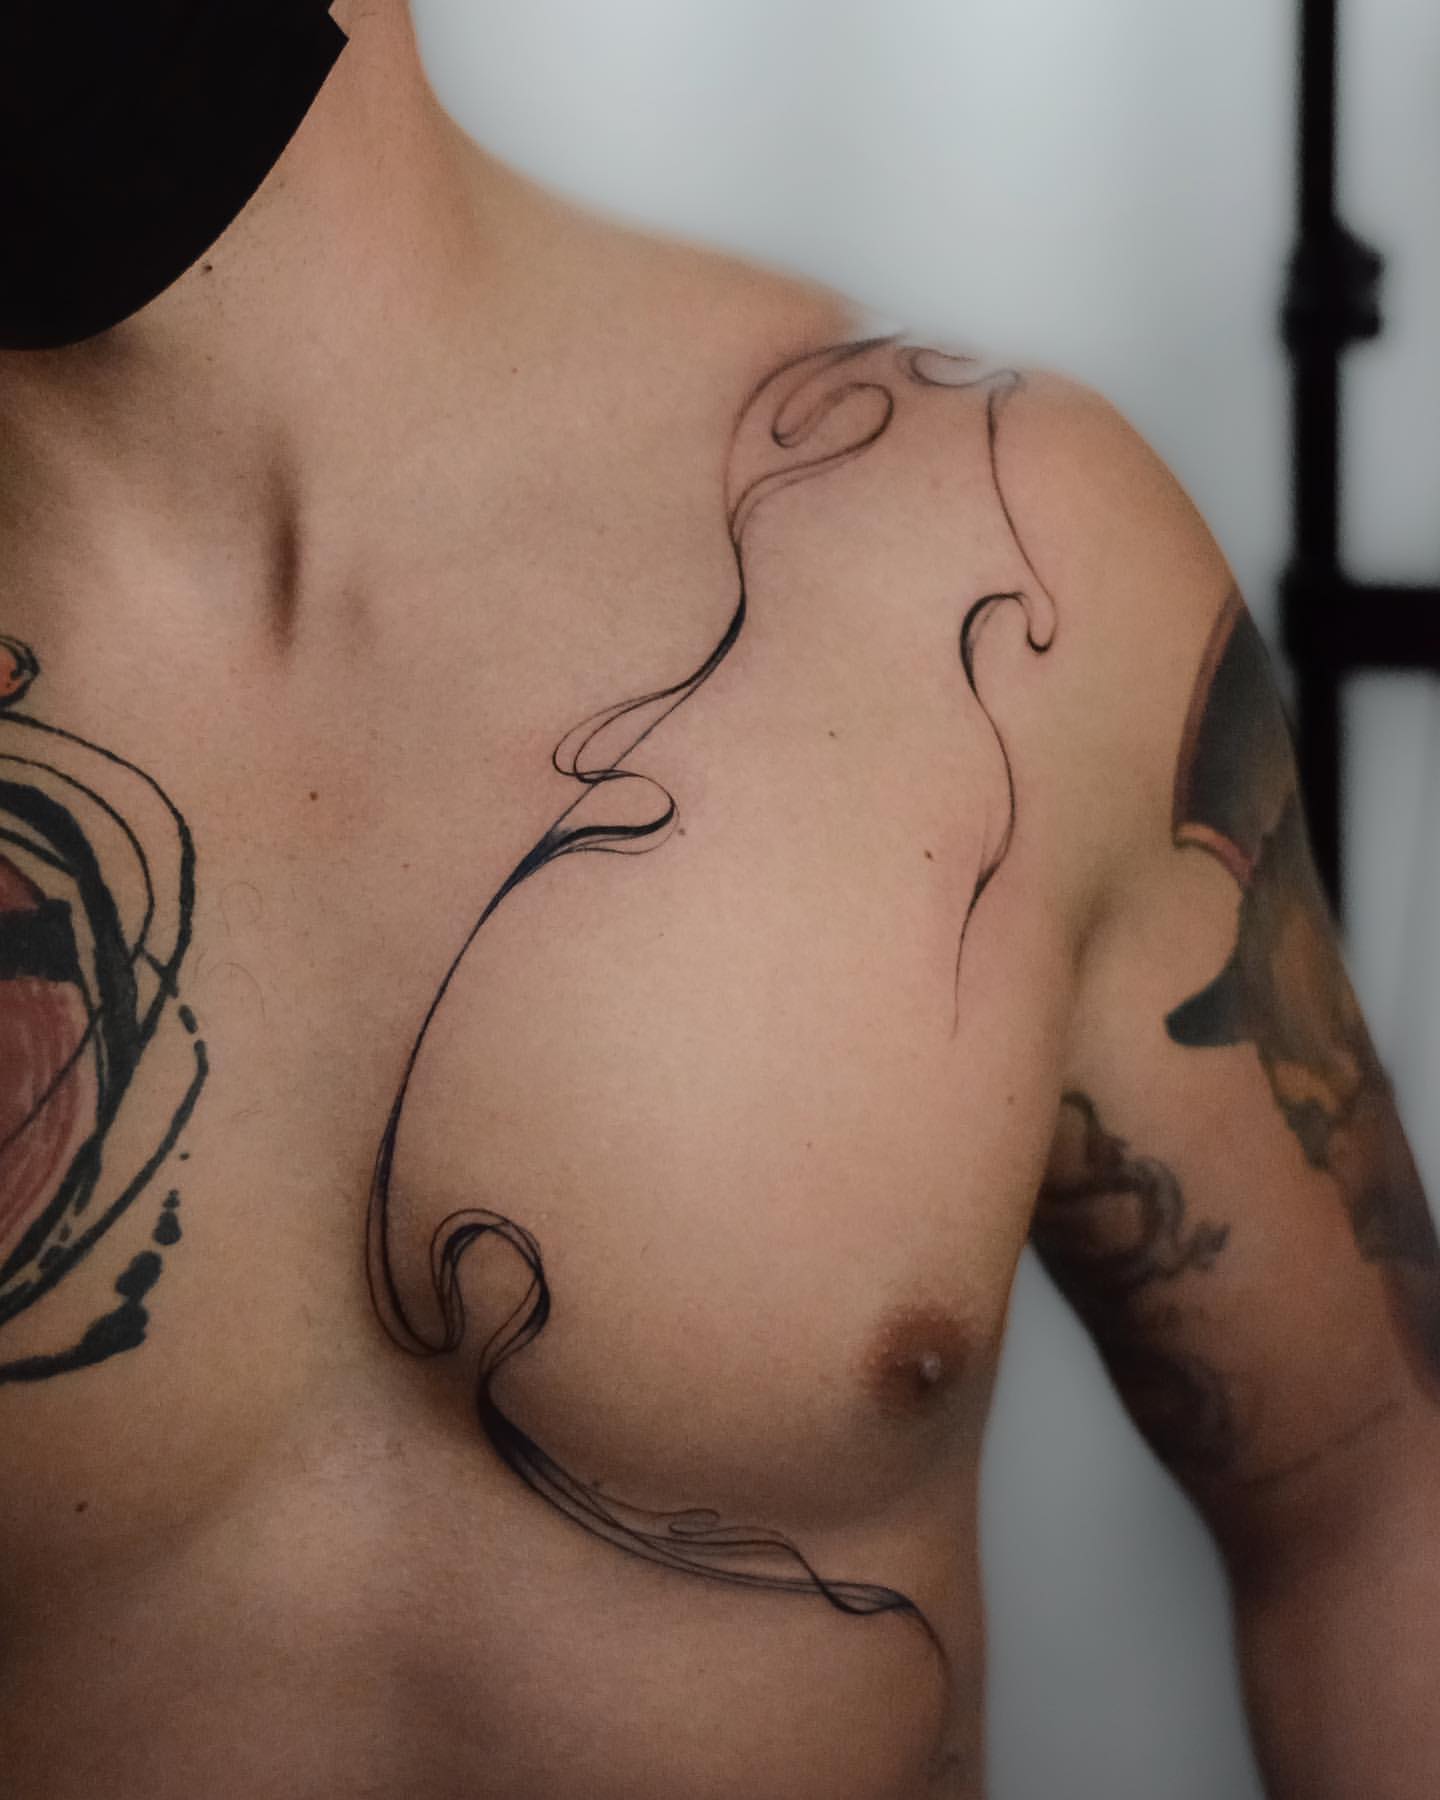 Stuck Tattoo Gallery  Check out this dope abstract chest tattoo that  Dustin did at the Cleveland Tattoo Arts Convention in 2018  If youre  searching for talented Tattoo Artists this compass